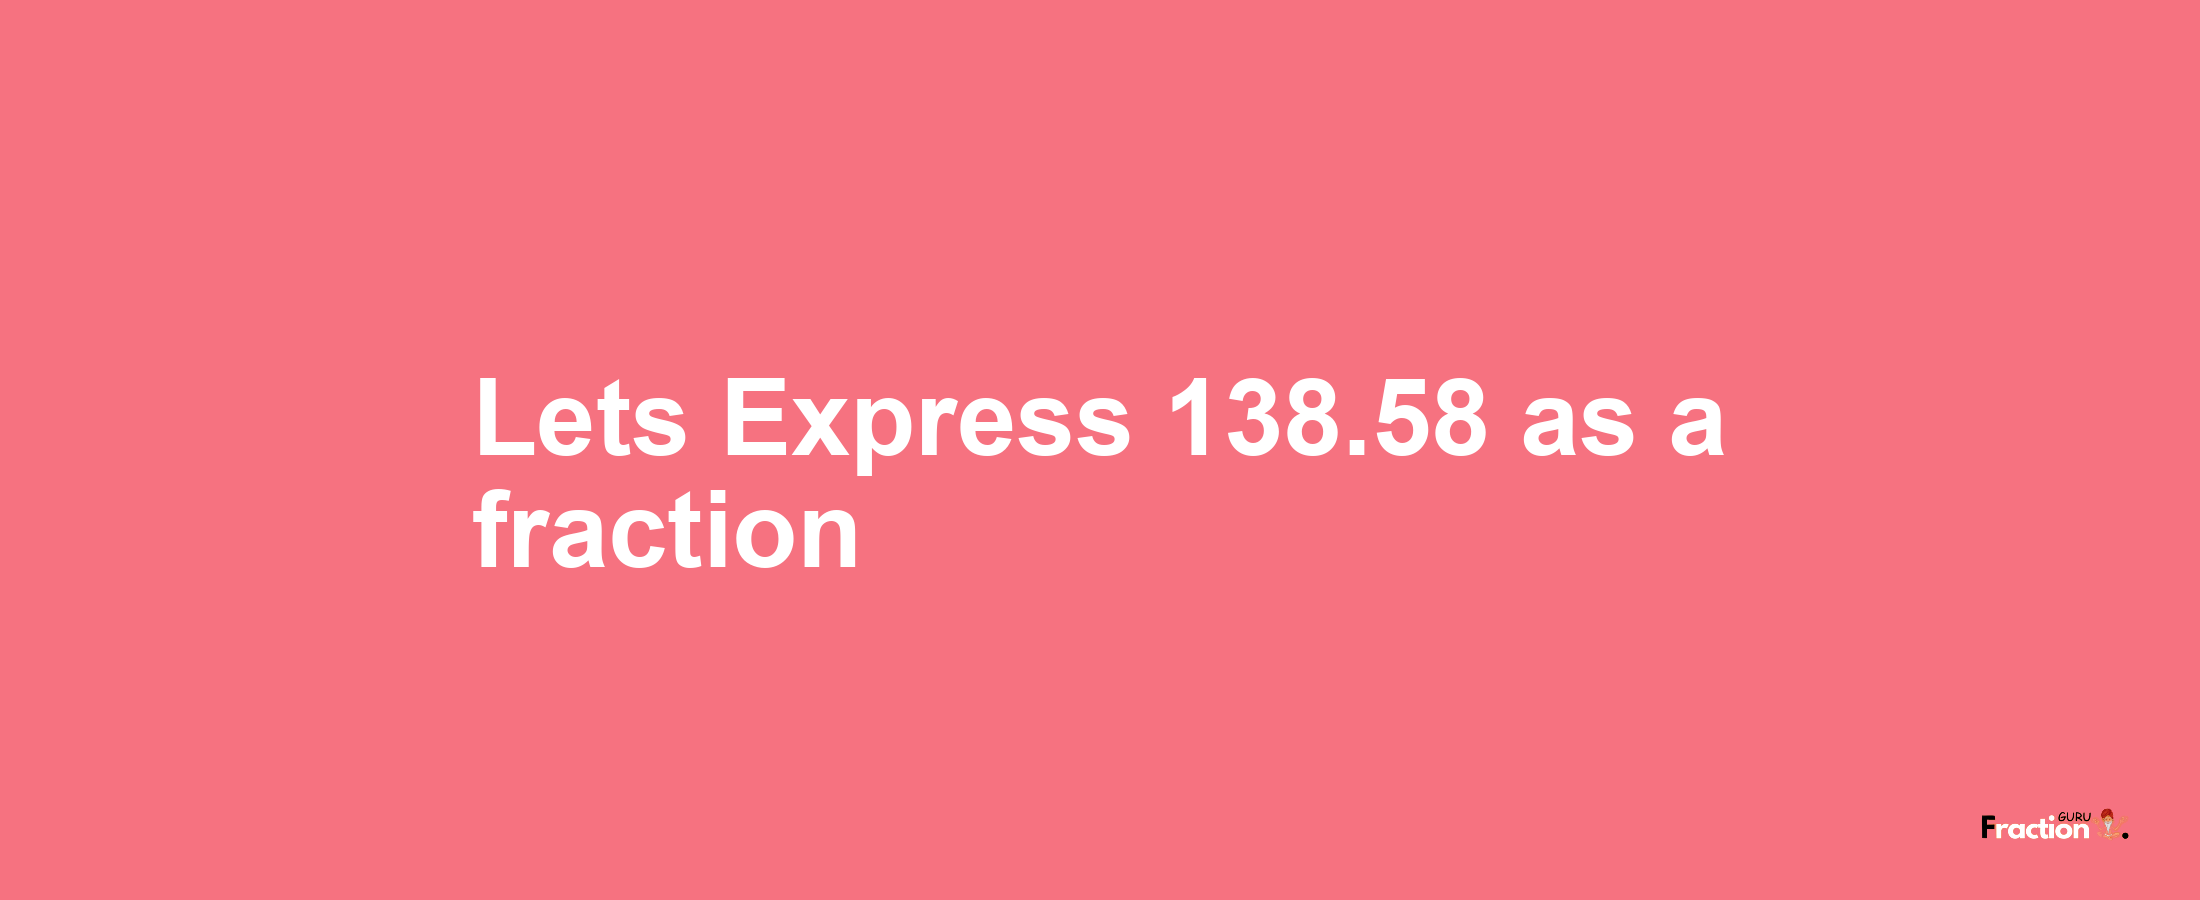 Lets Express 138.58 as afraction